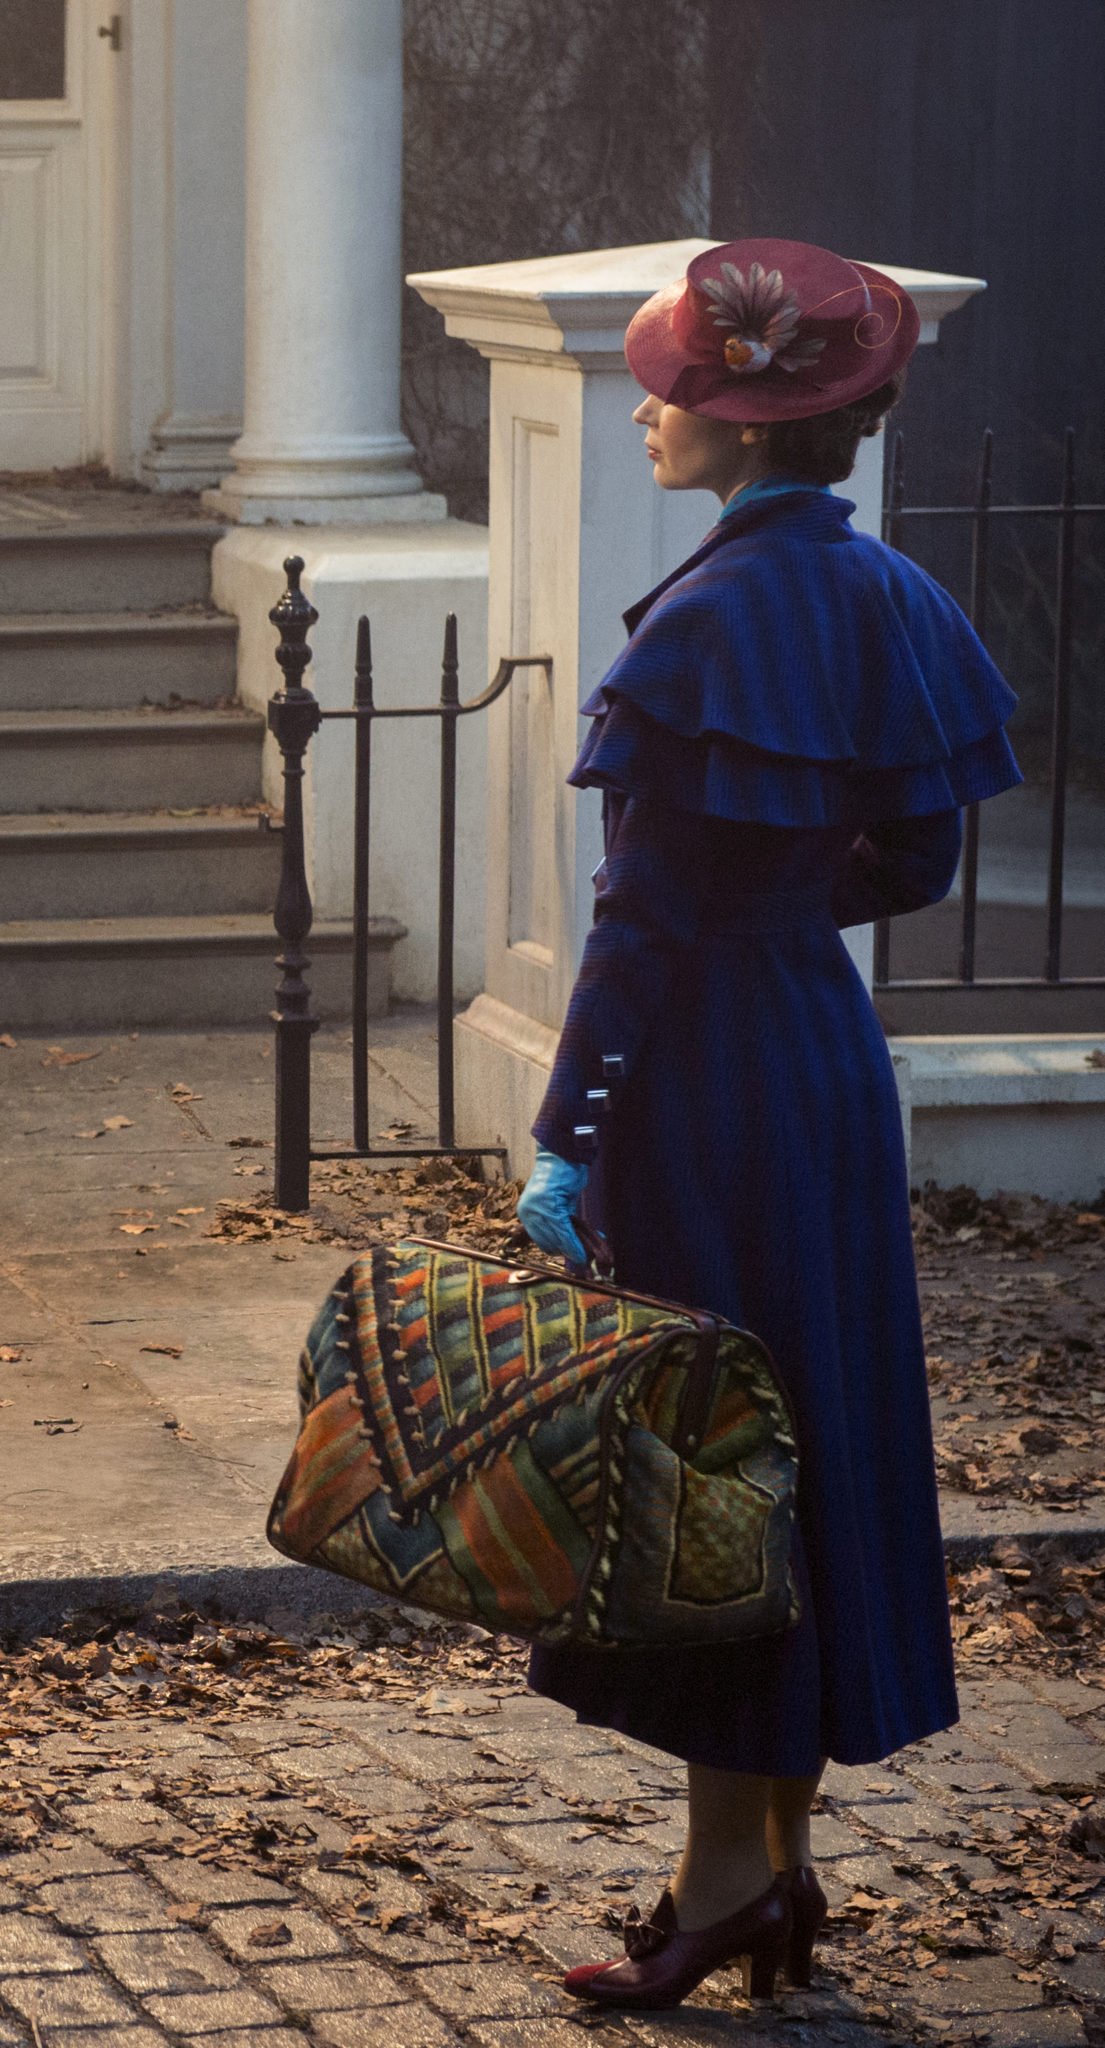 First Look: Emily Blunt as Mary Poppins from “Mary Poppins Returns”